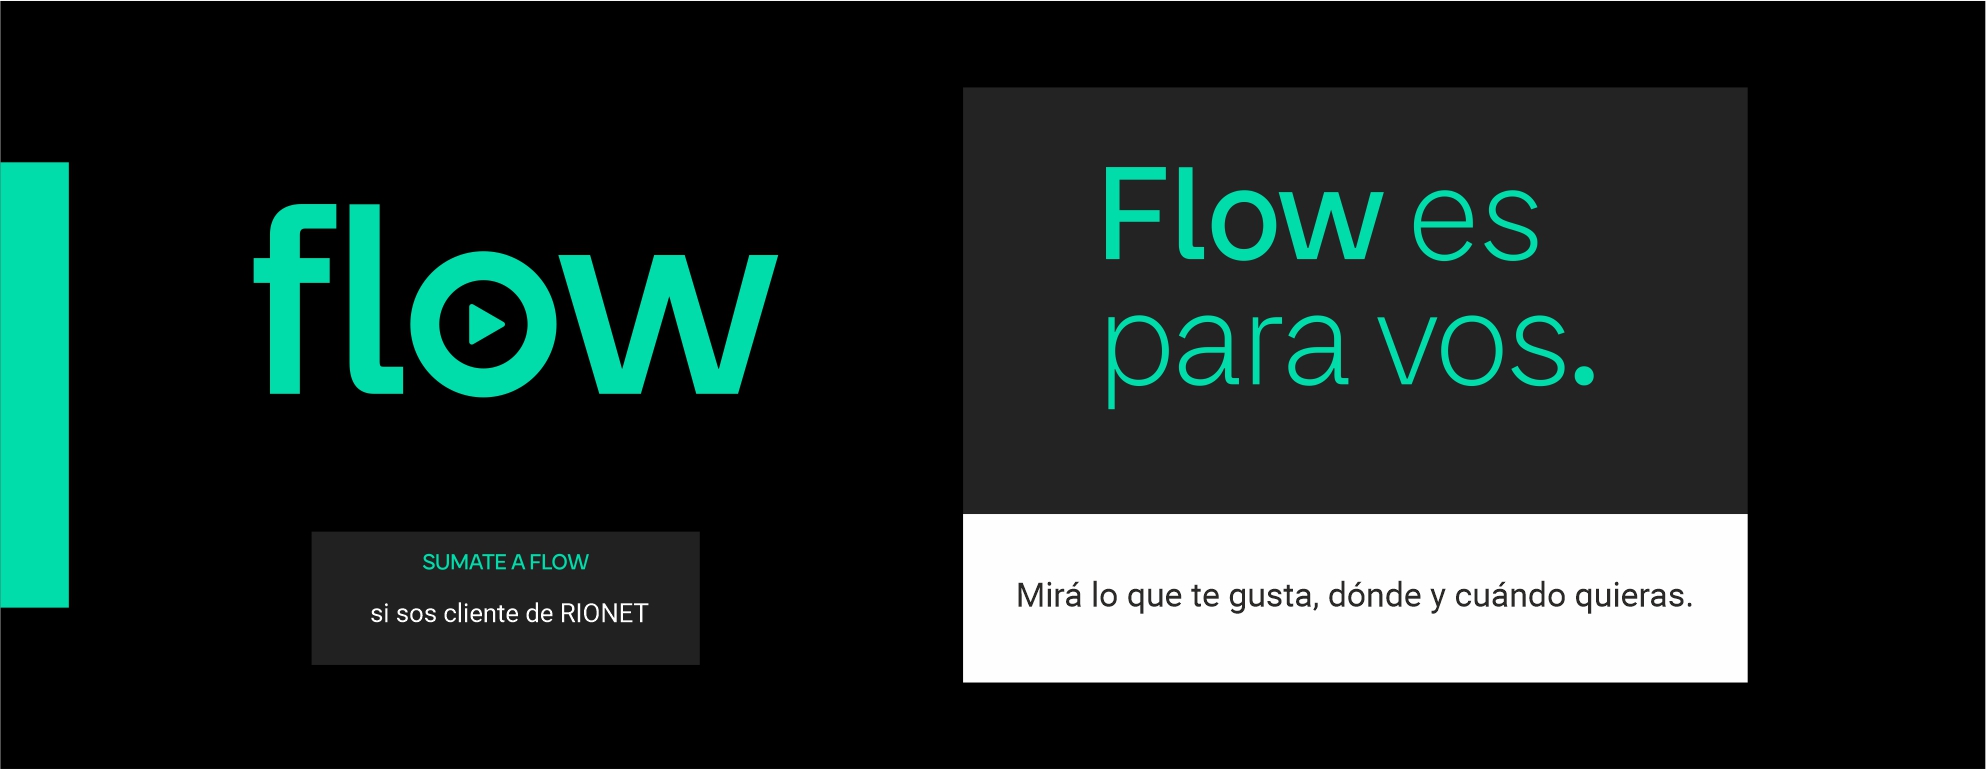 Sumate a FLOW.